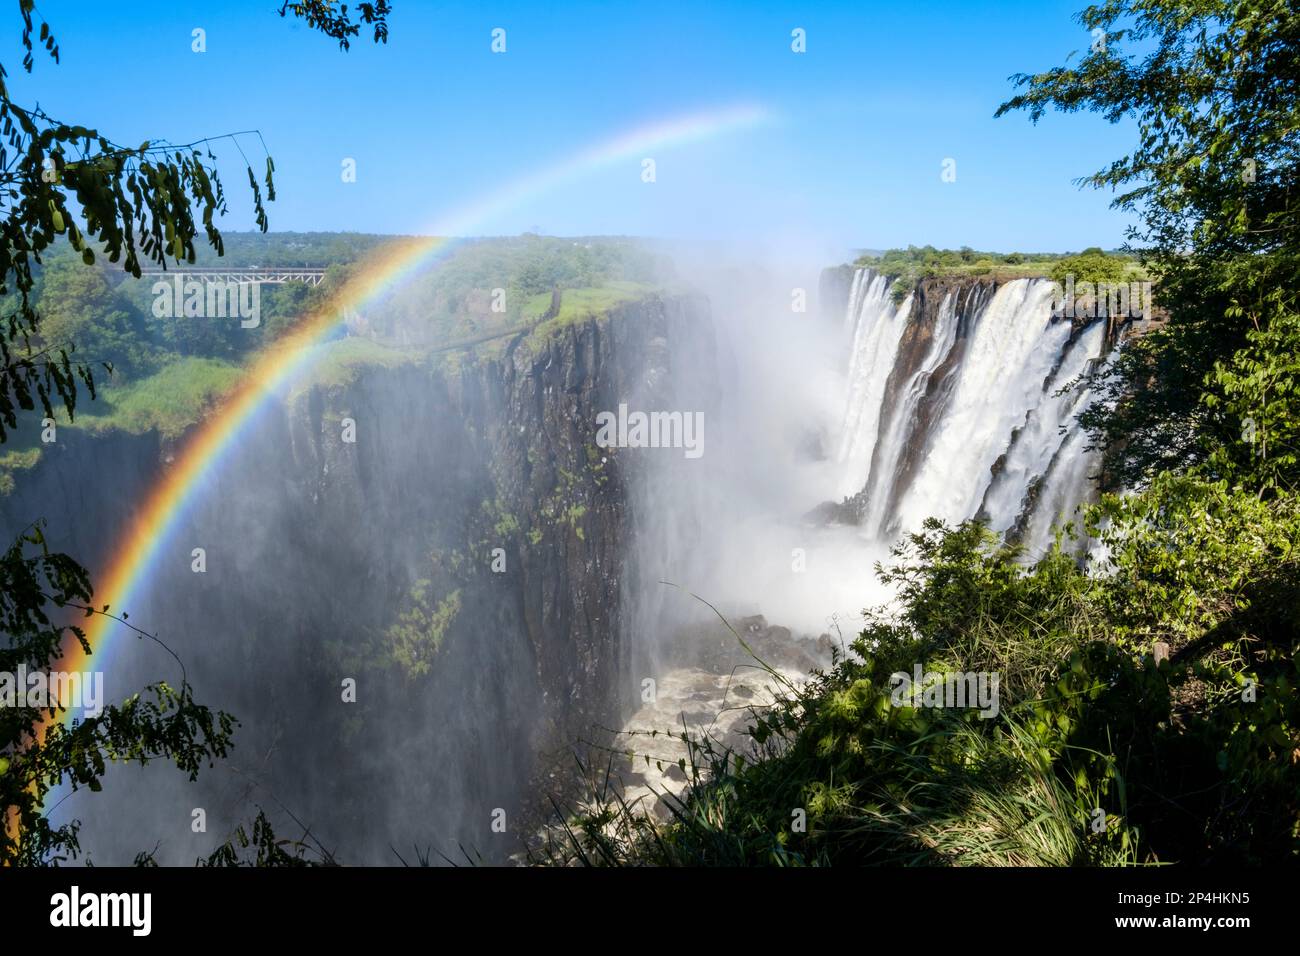 Waterfalls with rainbow, water falling down deep into the gorge. Victoria Waterfalls, Zambia, Africa Stock Photo